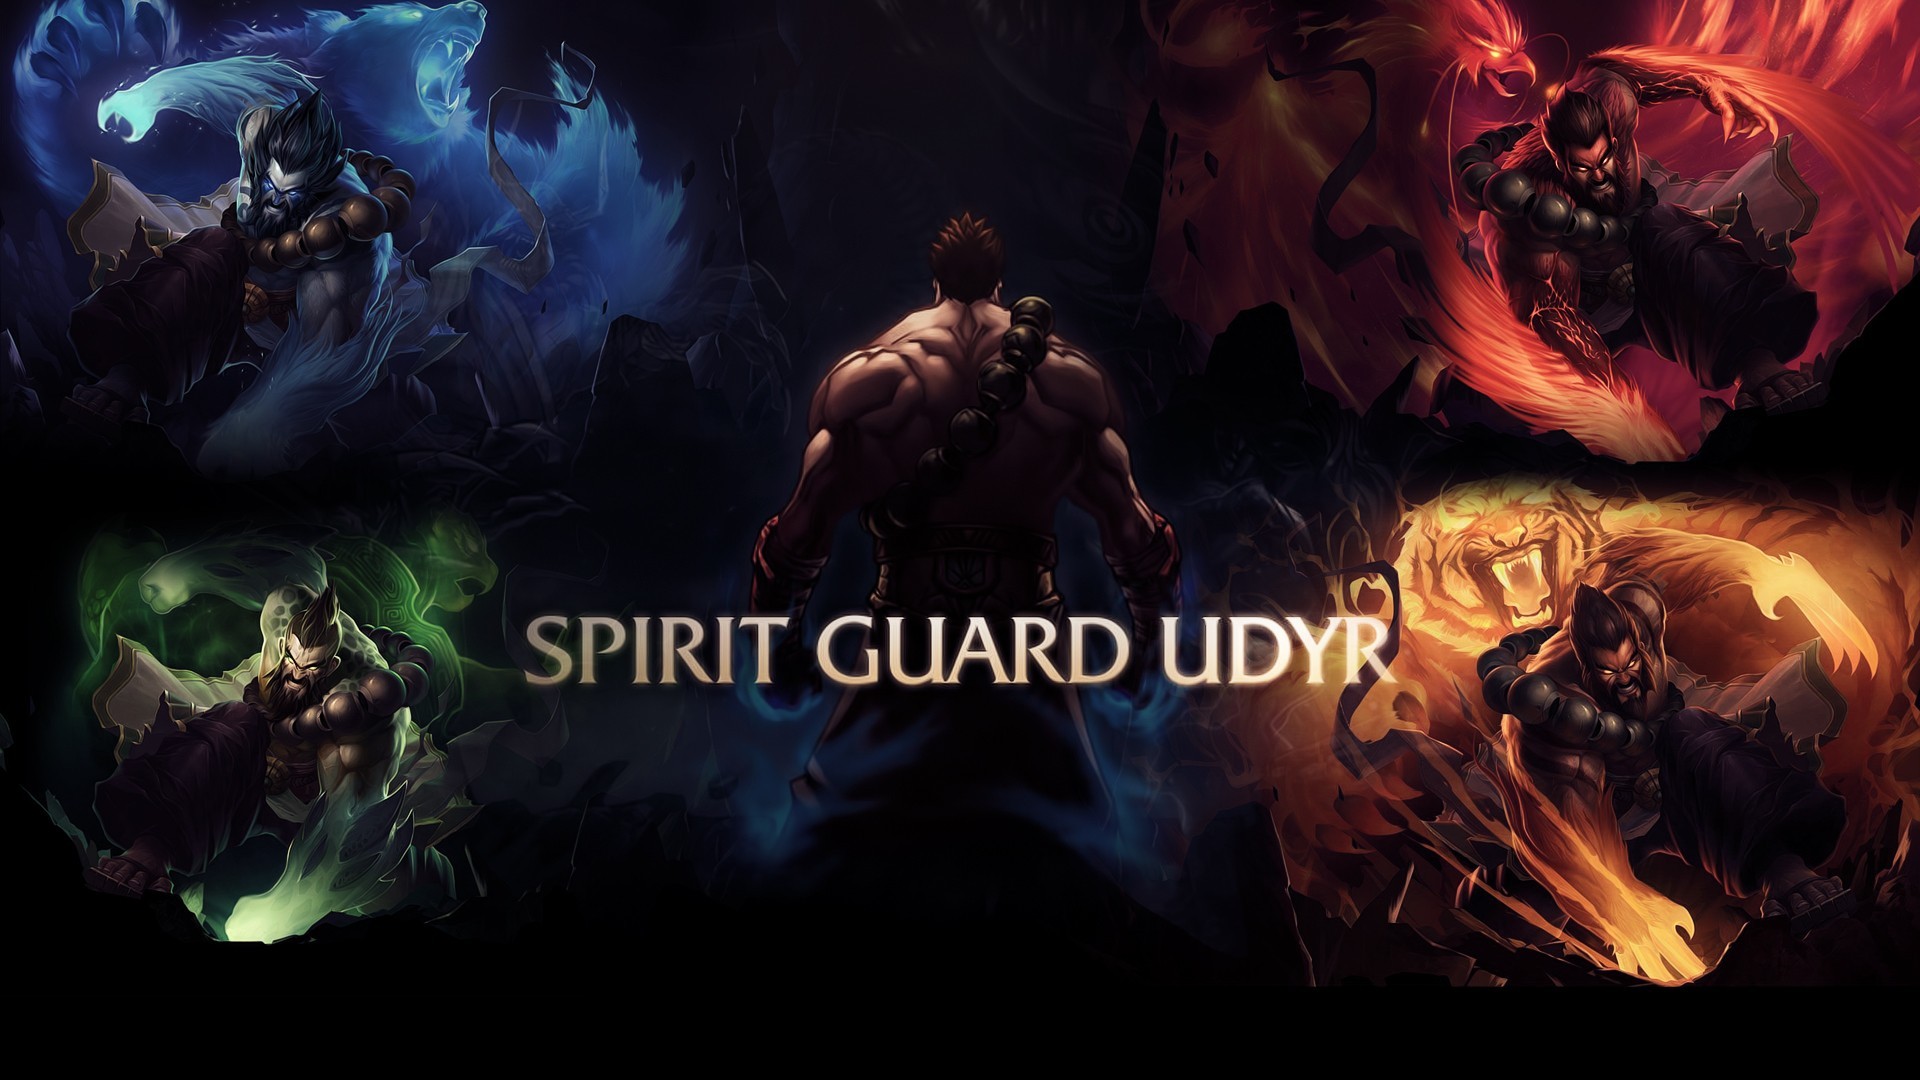 League of Legends HD Wallpapers stay006 | staywallpaper